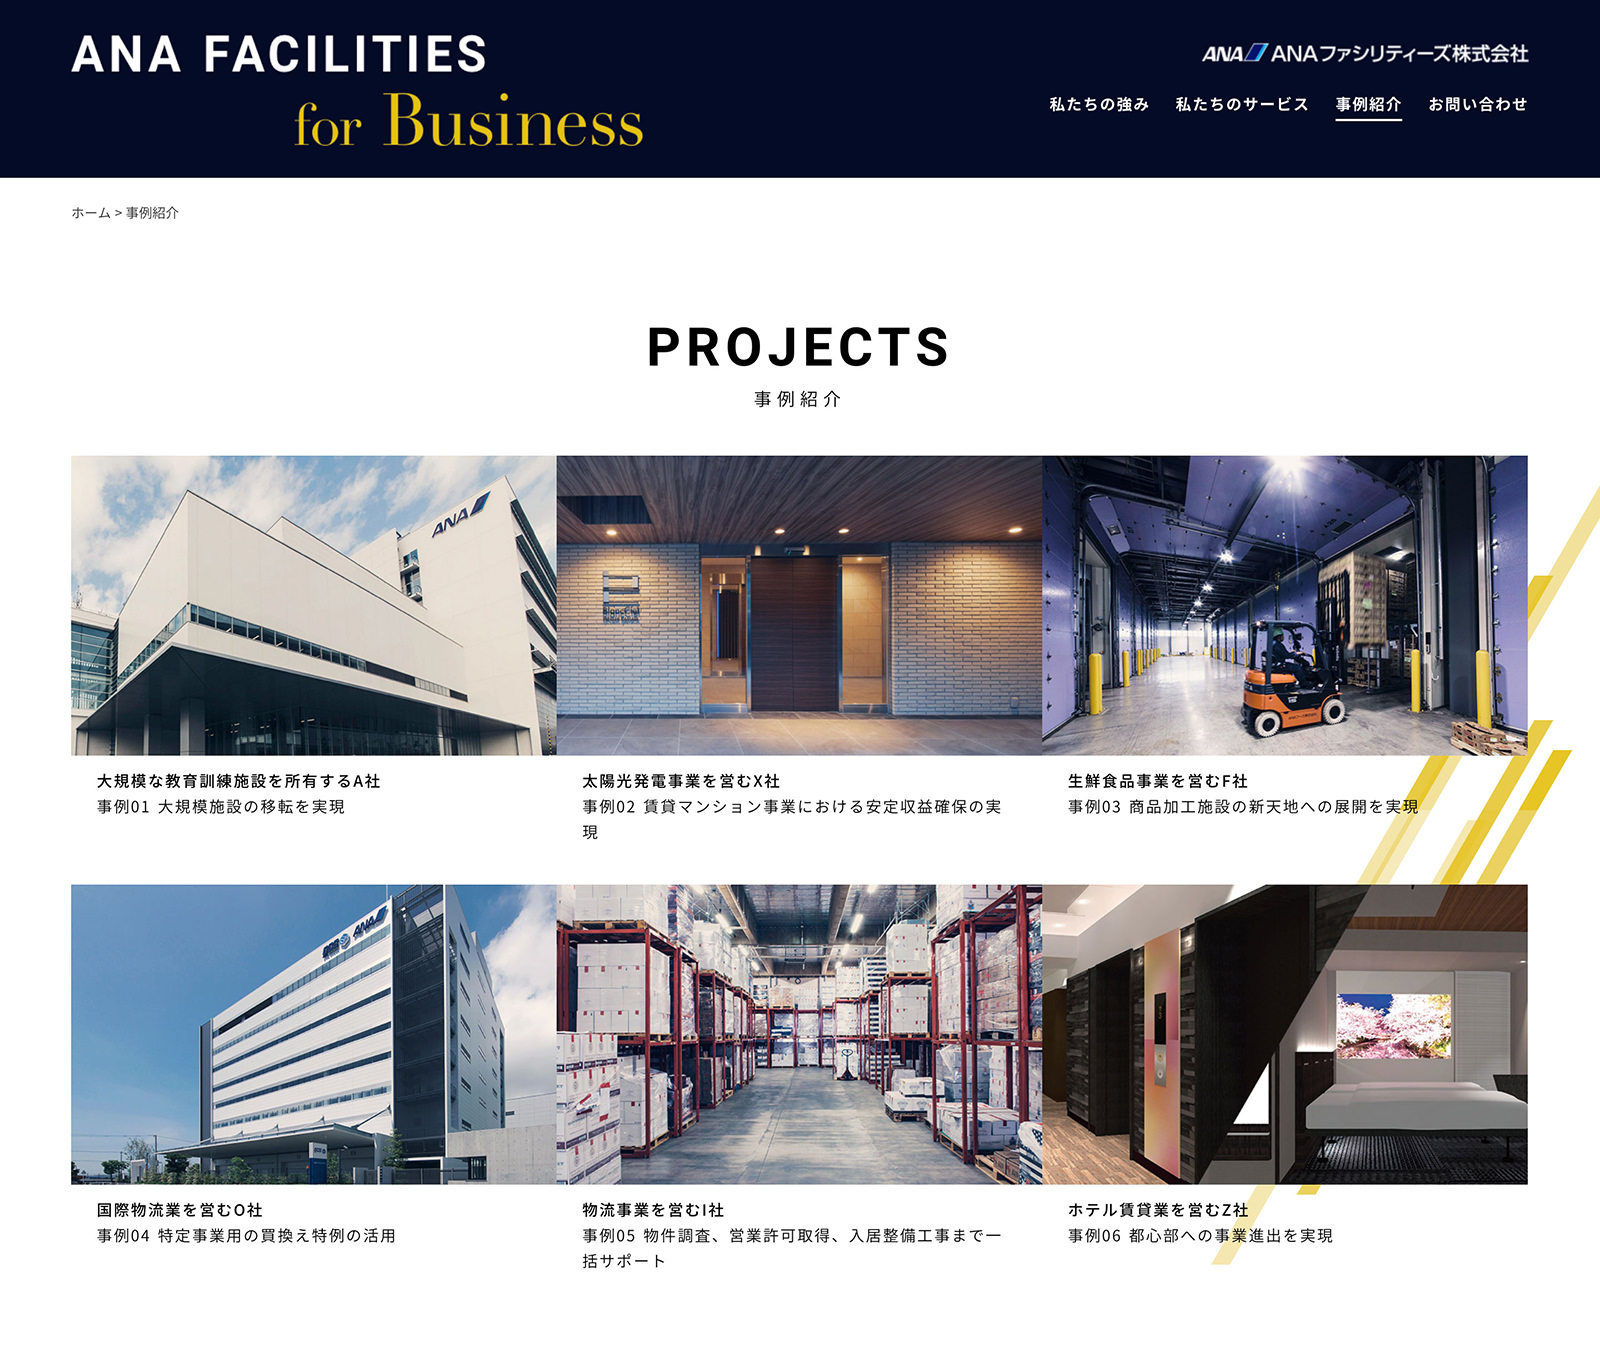 ANA FACILITIES for Business